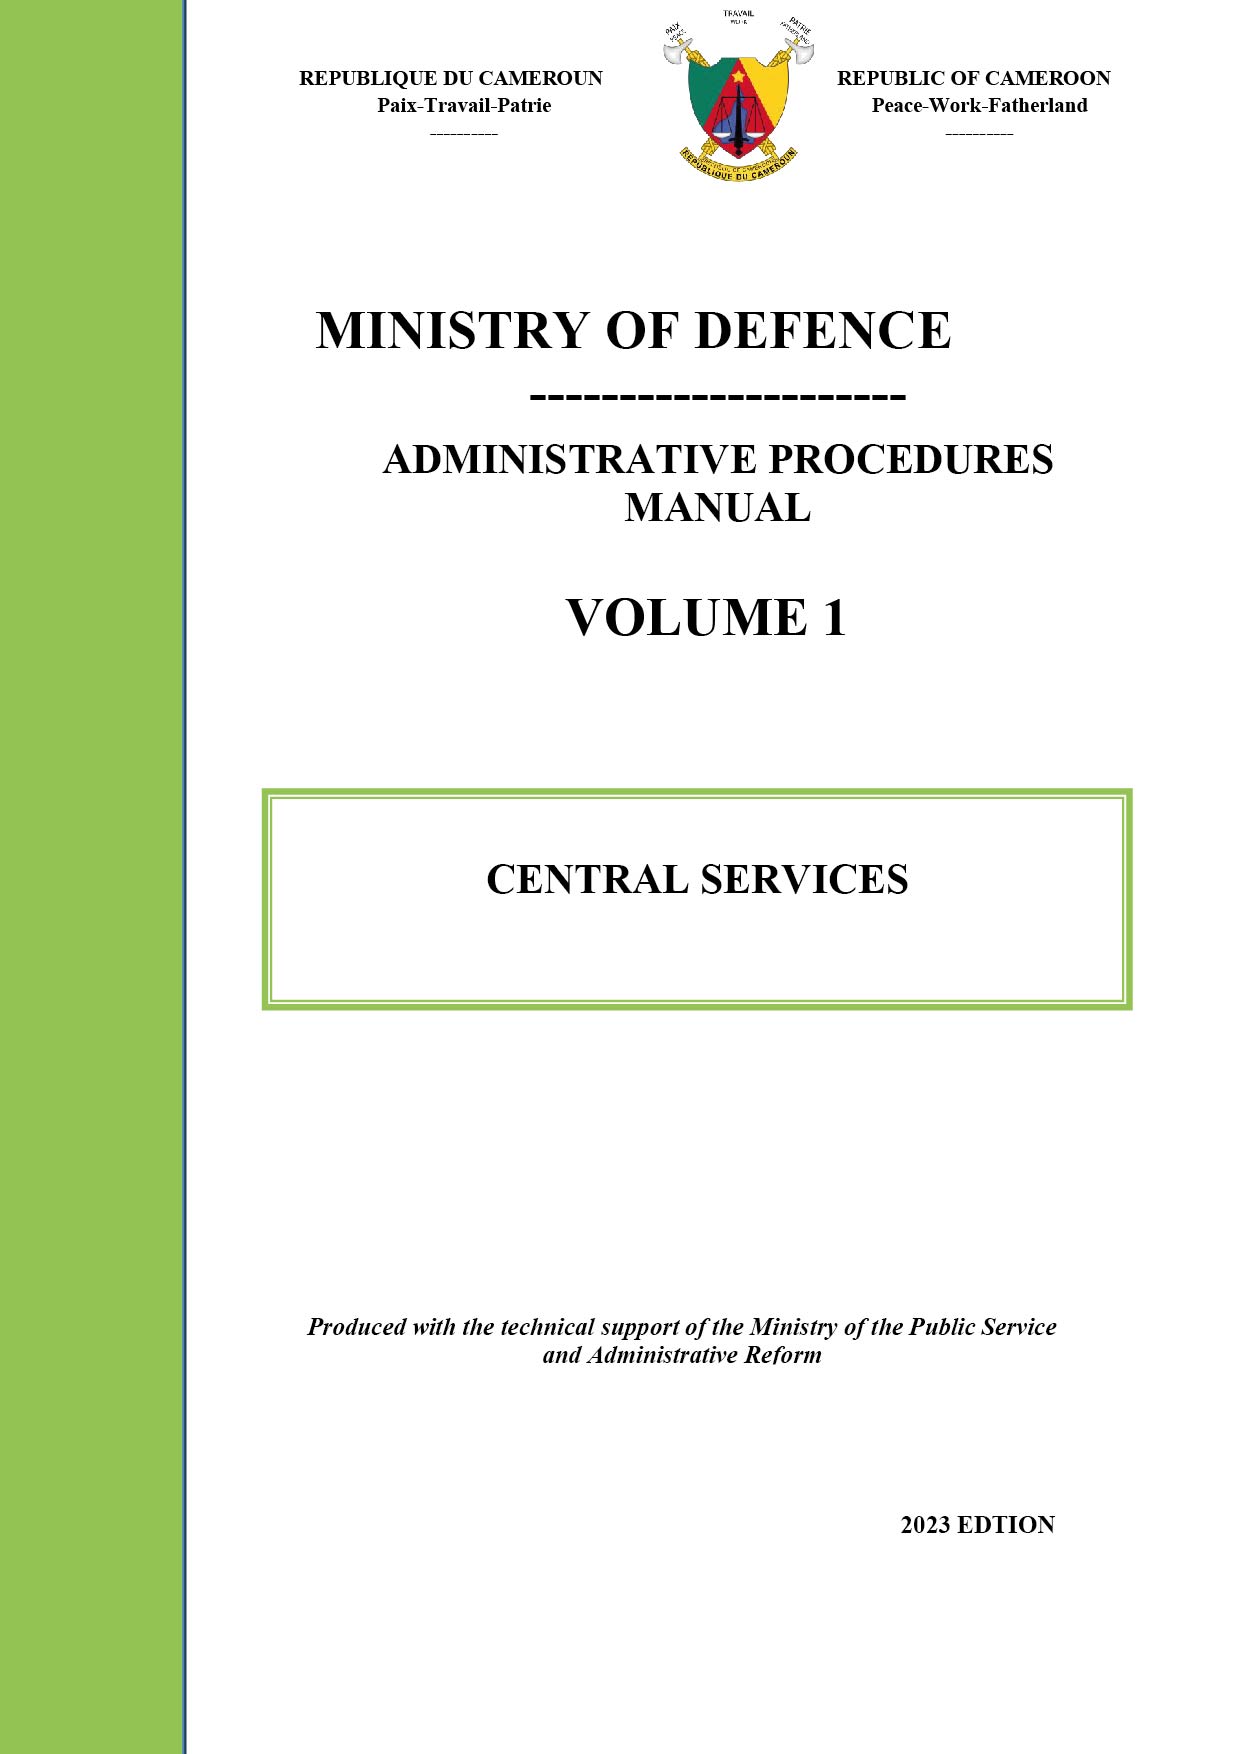 ADMINISTRATIVE PROCEDURES MANUAL CENTRAL SERVICES VOLUME 1